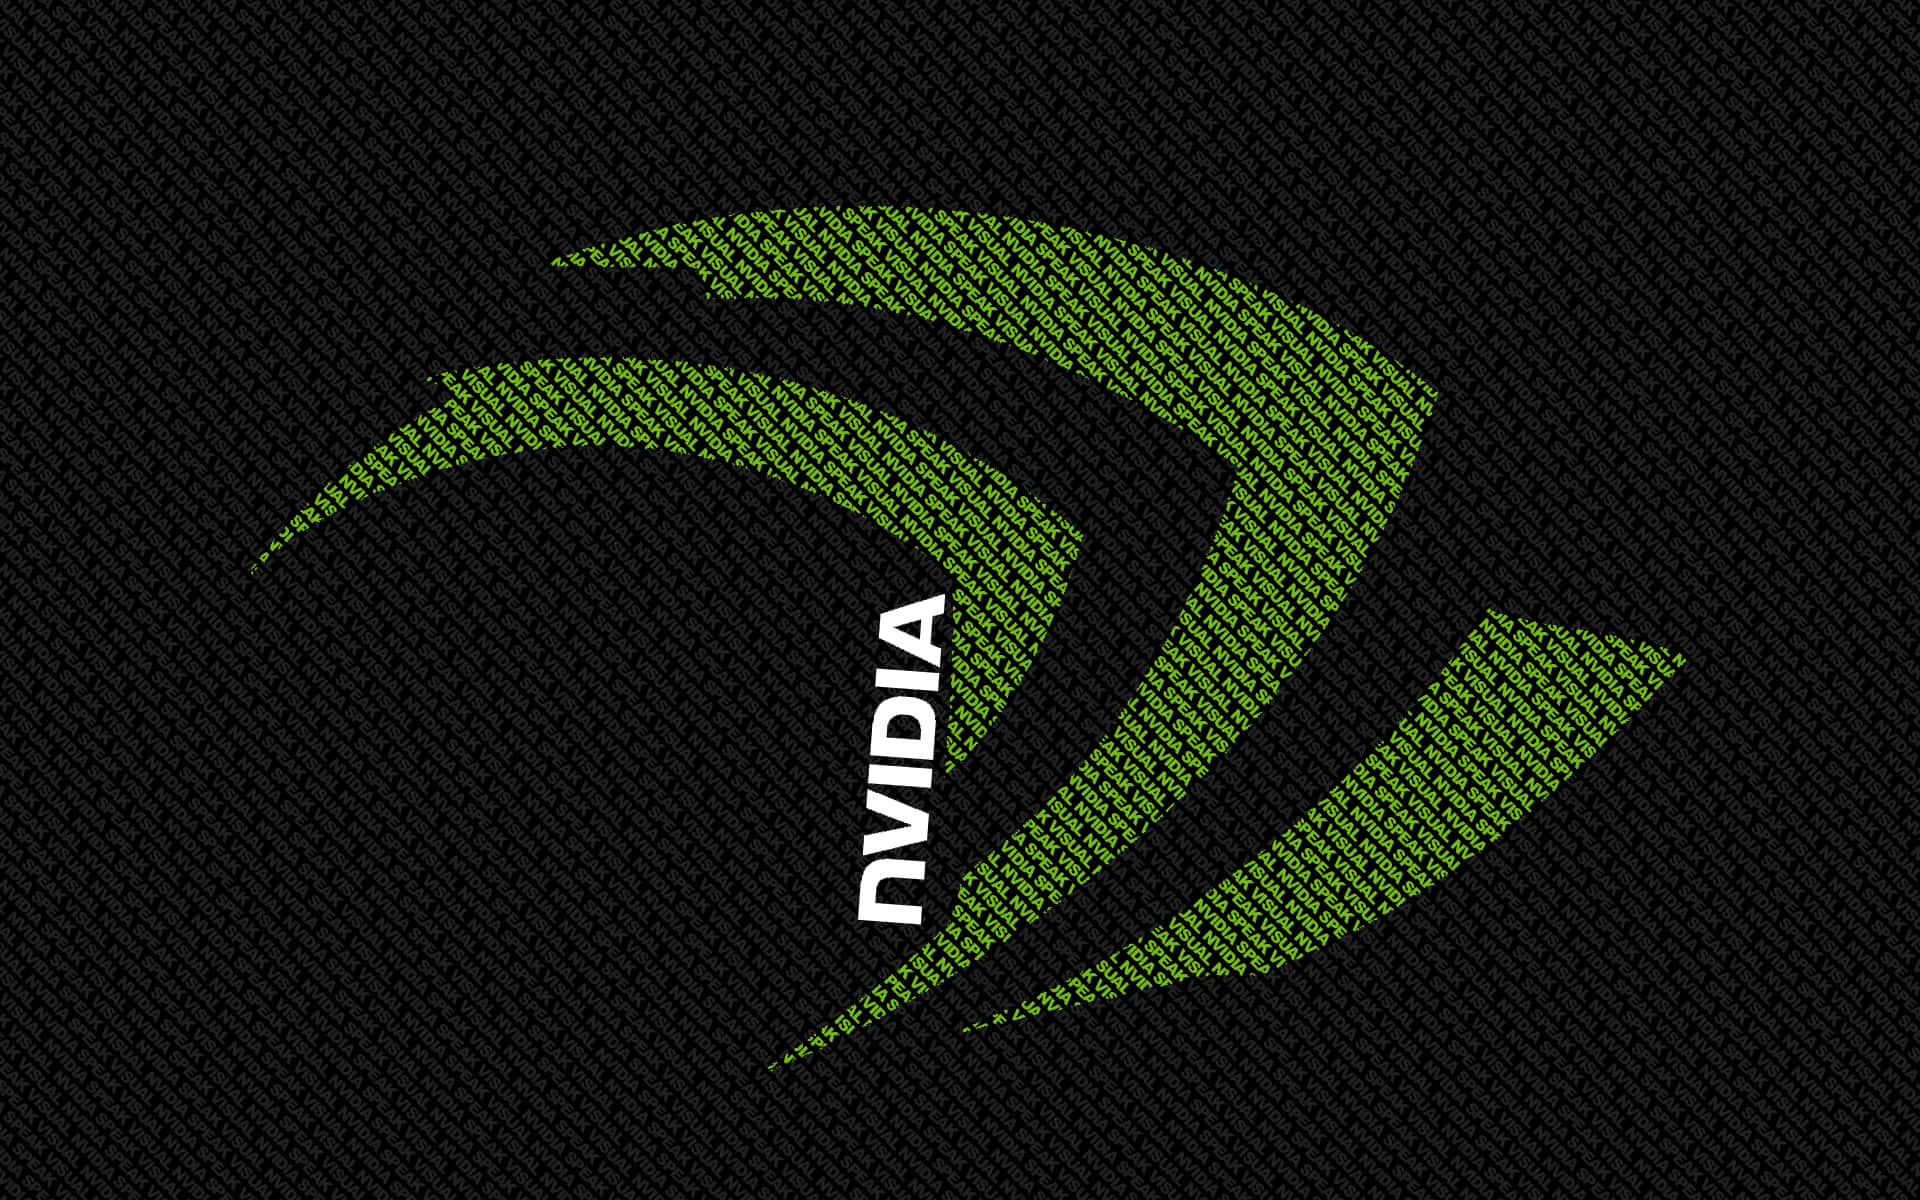 Stay ahead of the competition with the NVIDIA GeForce RTX 3000 Series.